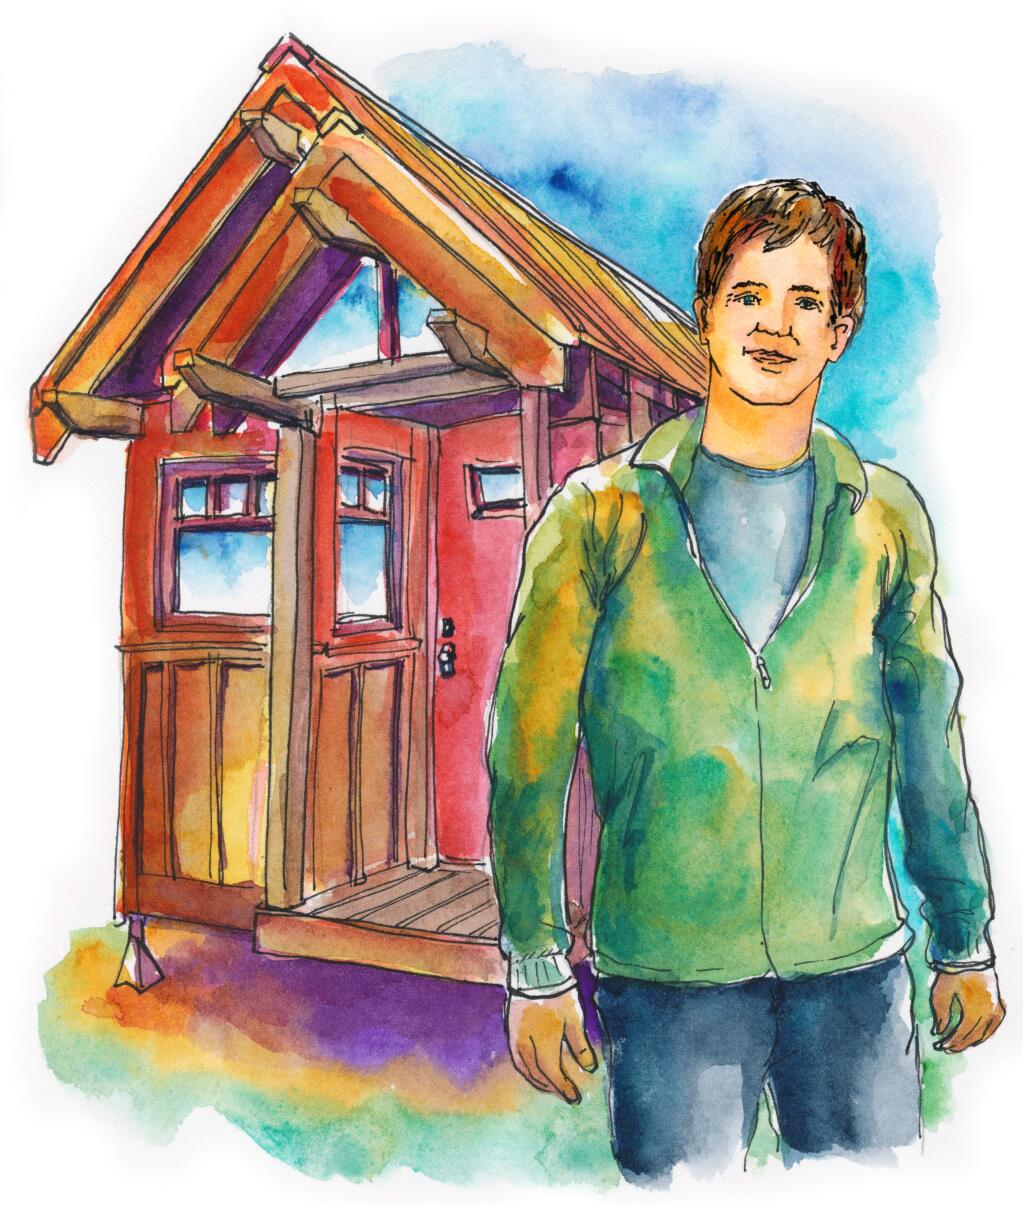 Sebastopol's Jay Shafer, who is planning a community of tiny houses, says residents of small homes learn to live simply. (Richard Sheppard sketch)